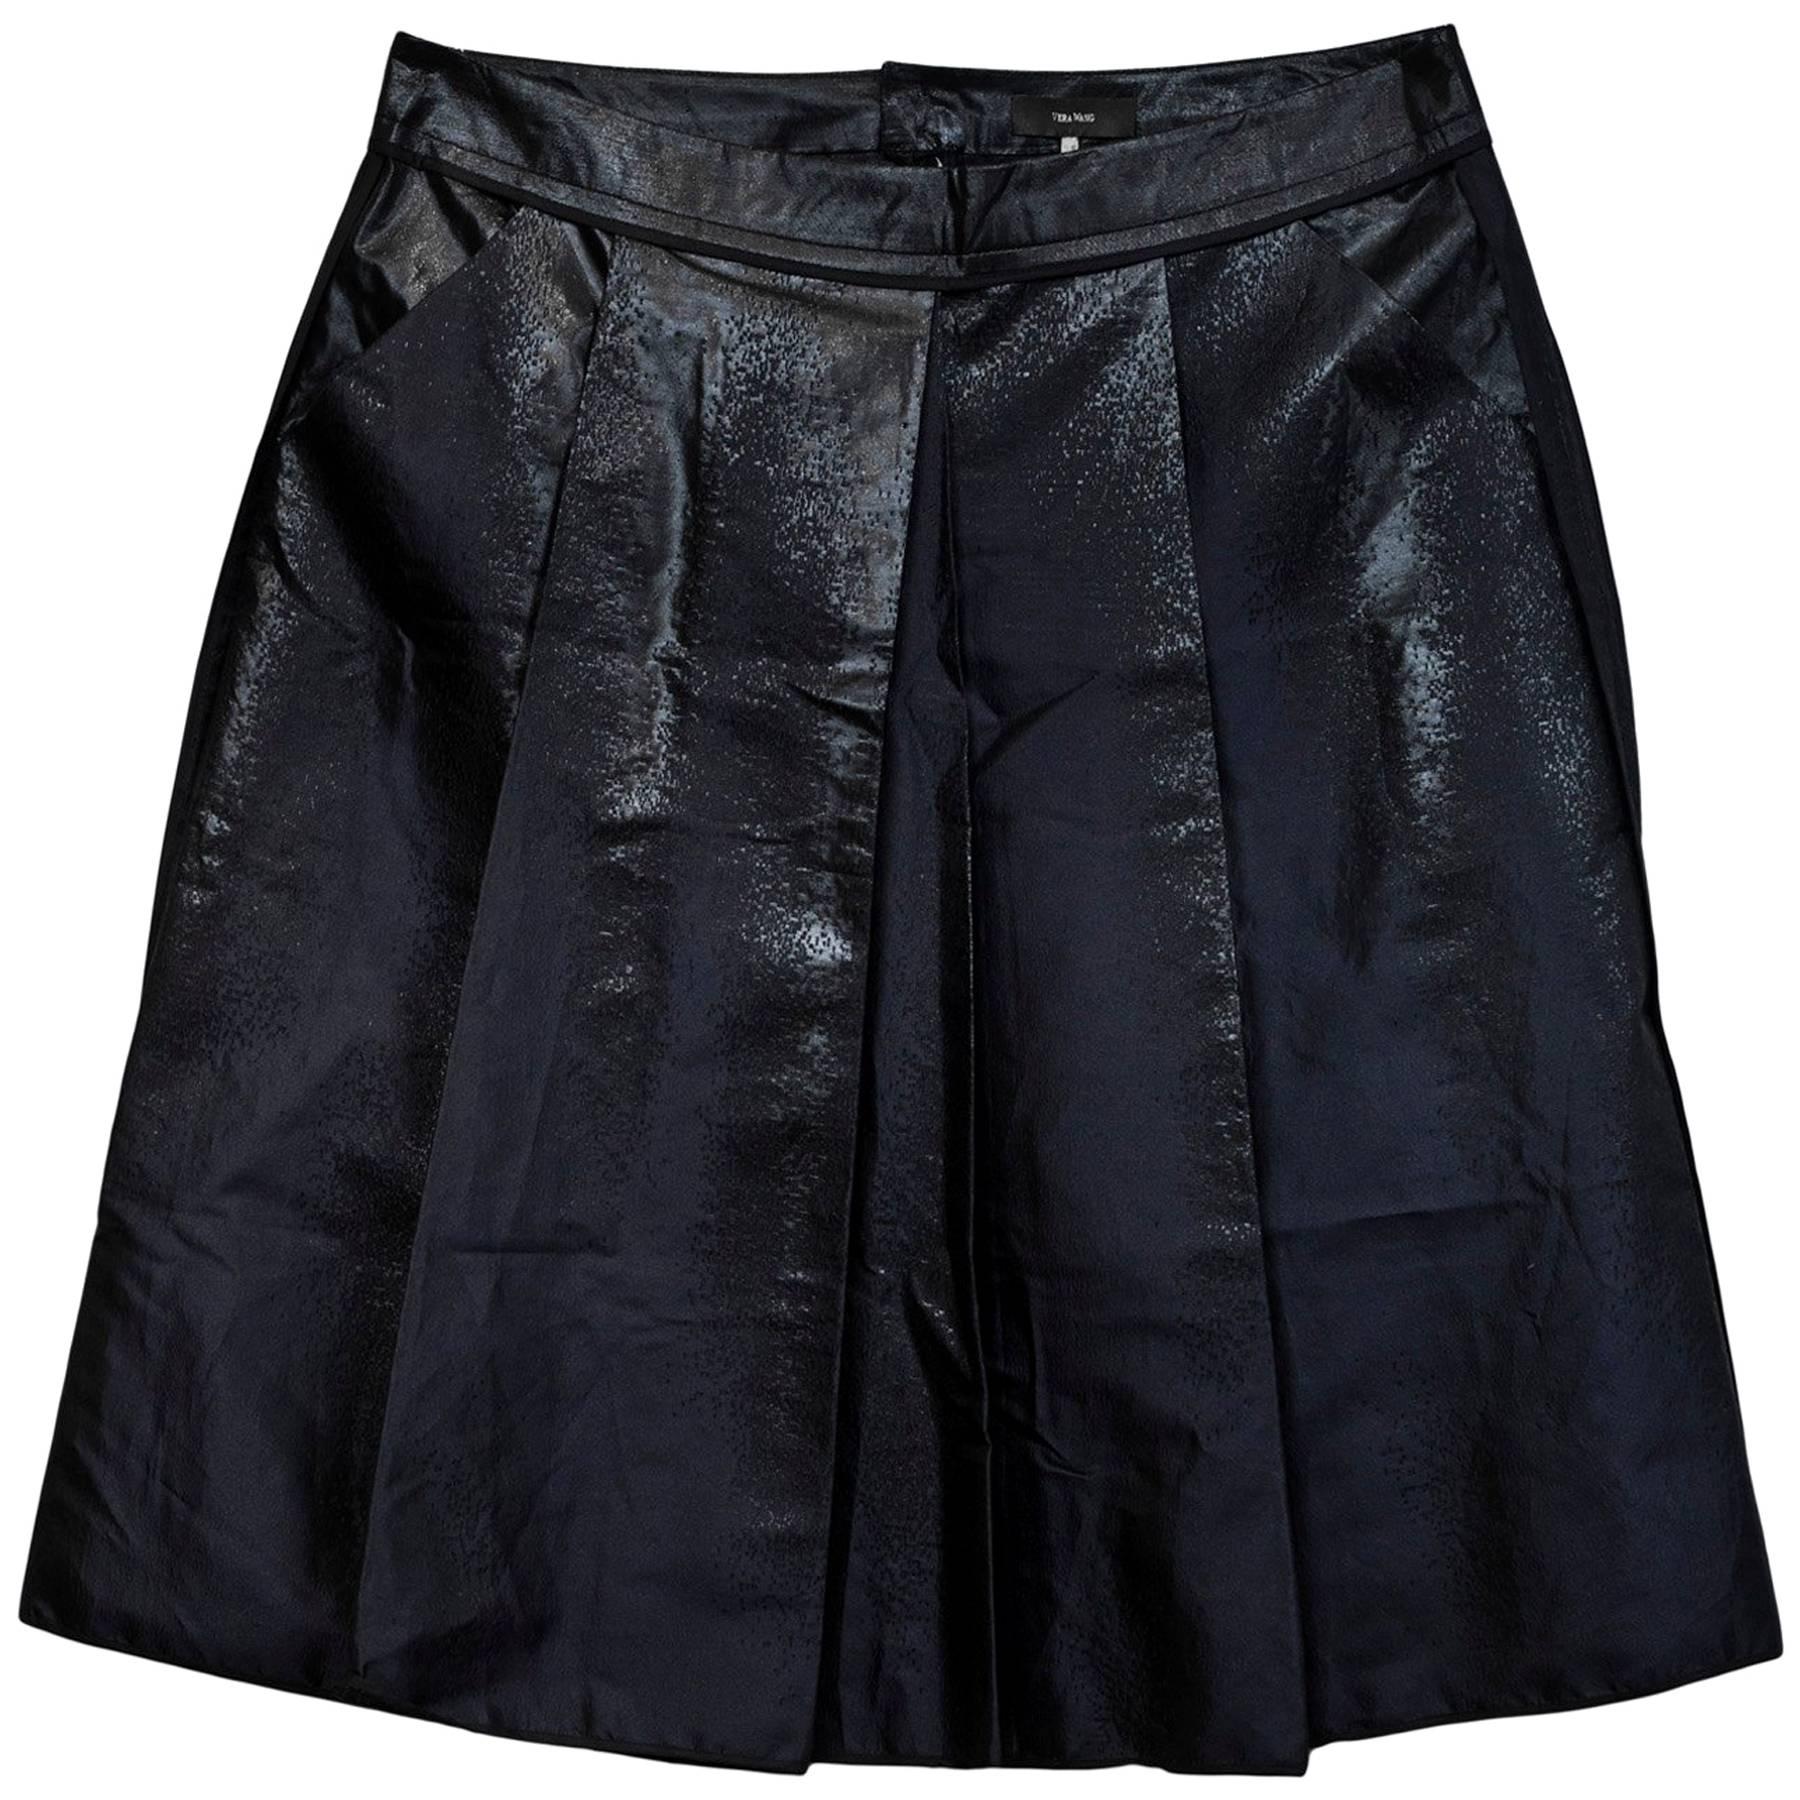 Vera Wang Navy Iridescent Pleated Skirt Sz 8 with Tags rt. $1, 035